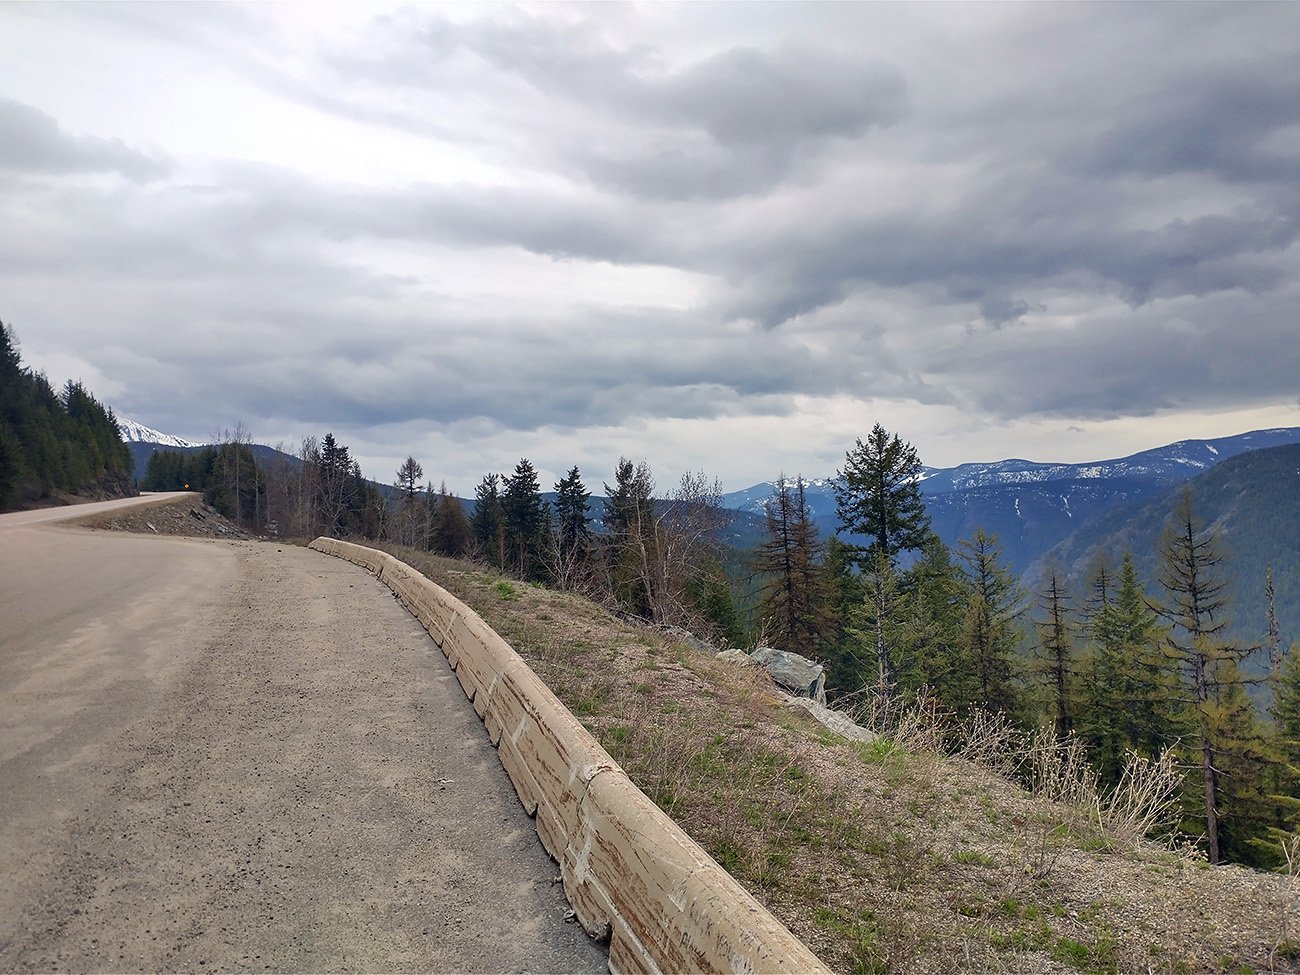 Fortunately the way down to Castlegar was dry, although extremely windy to the point I had to pedal the entire way down. Still a win.